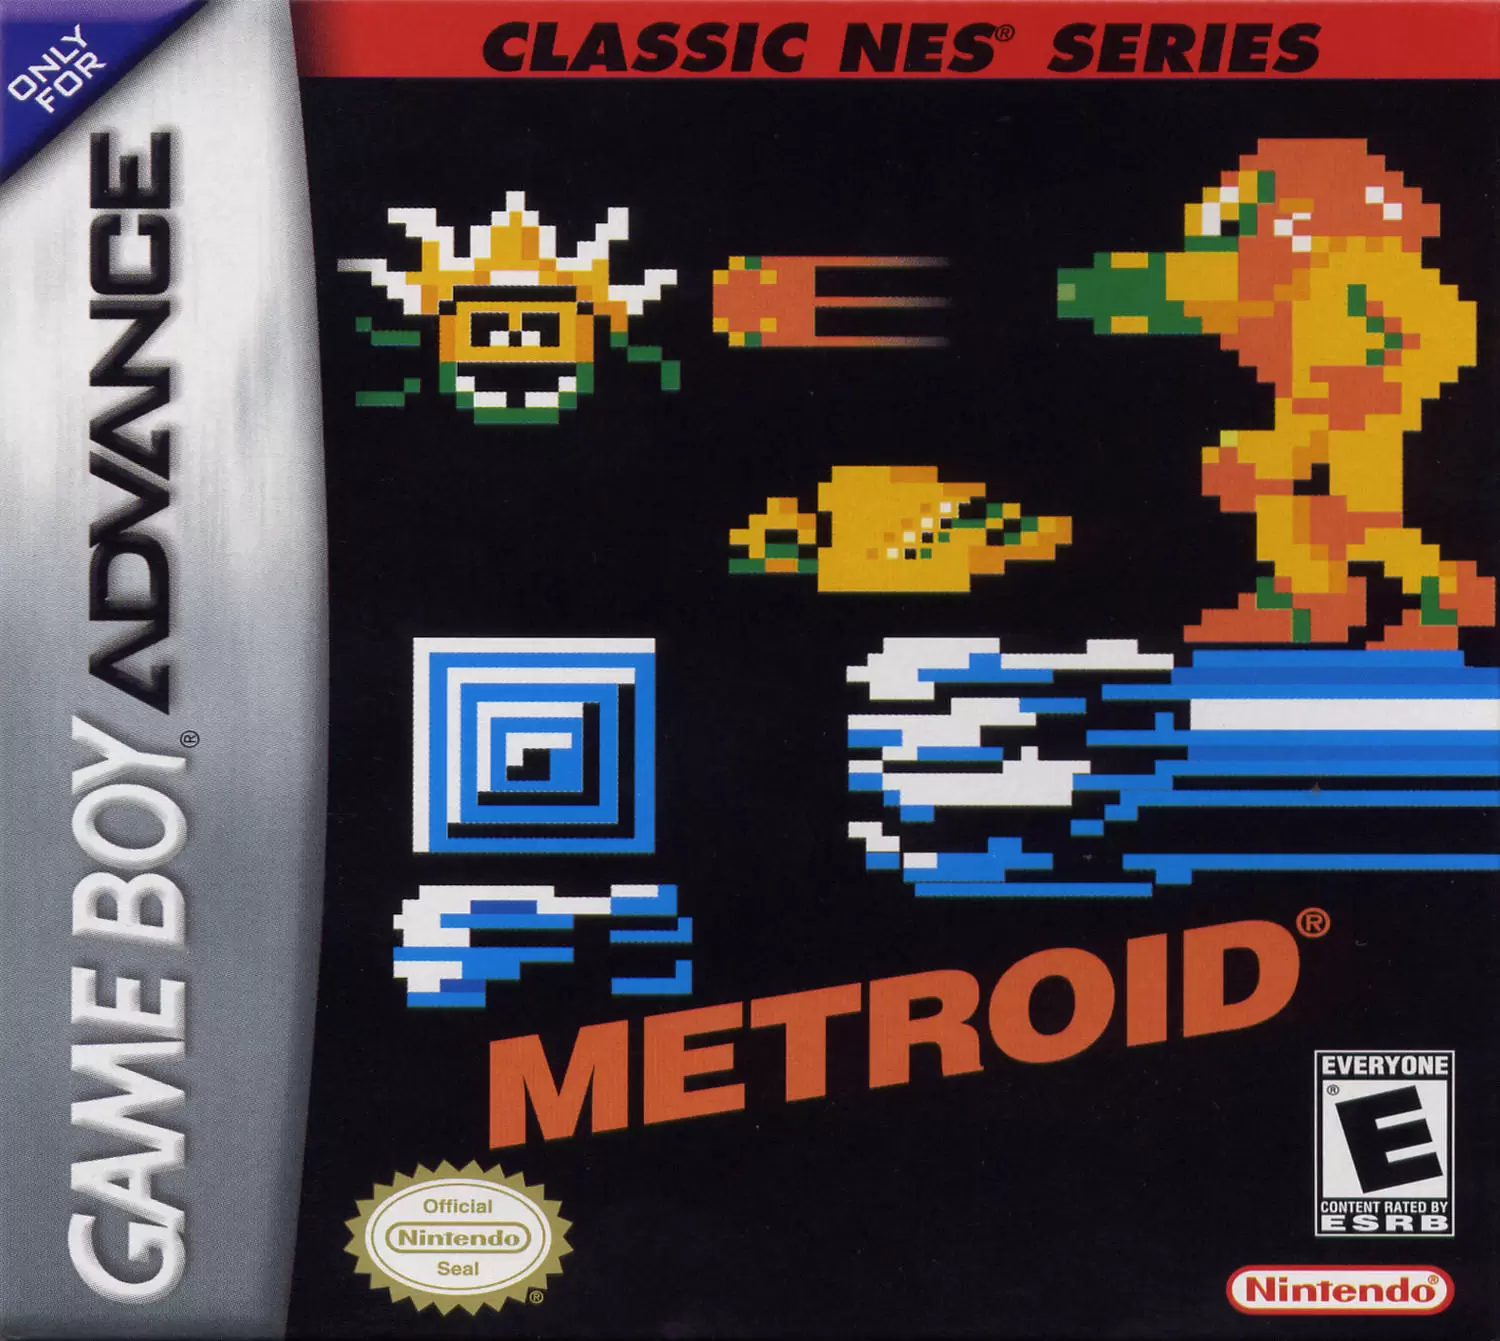 Game Boy Advance Games - Classic NES Series: Metroid